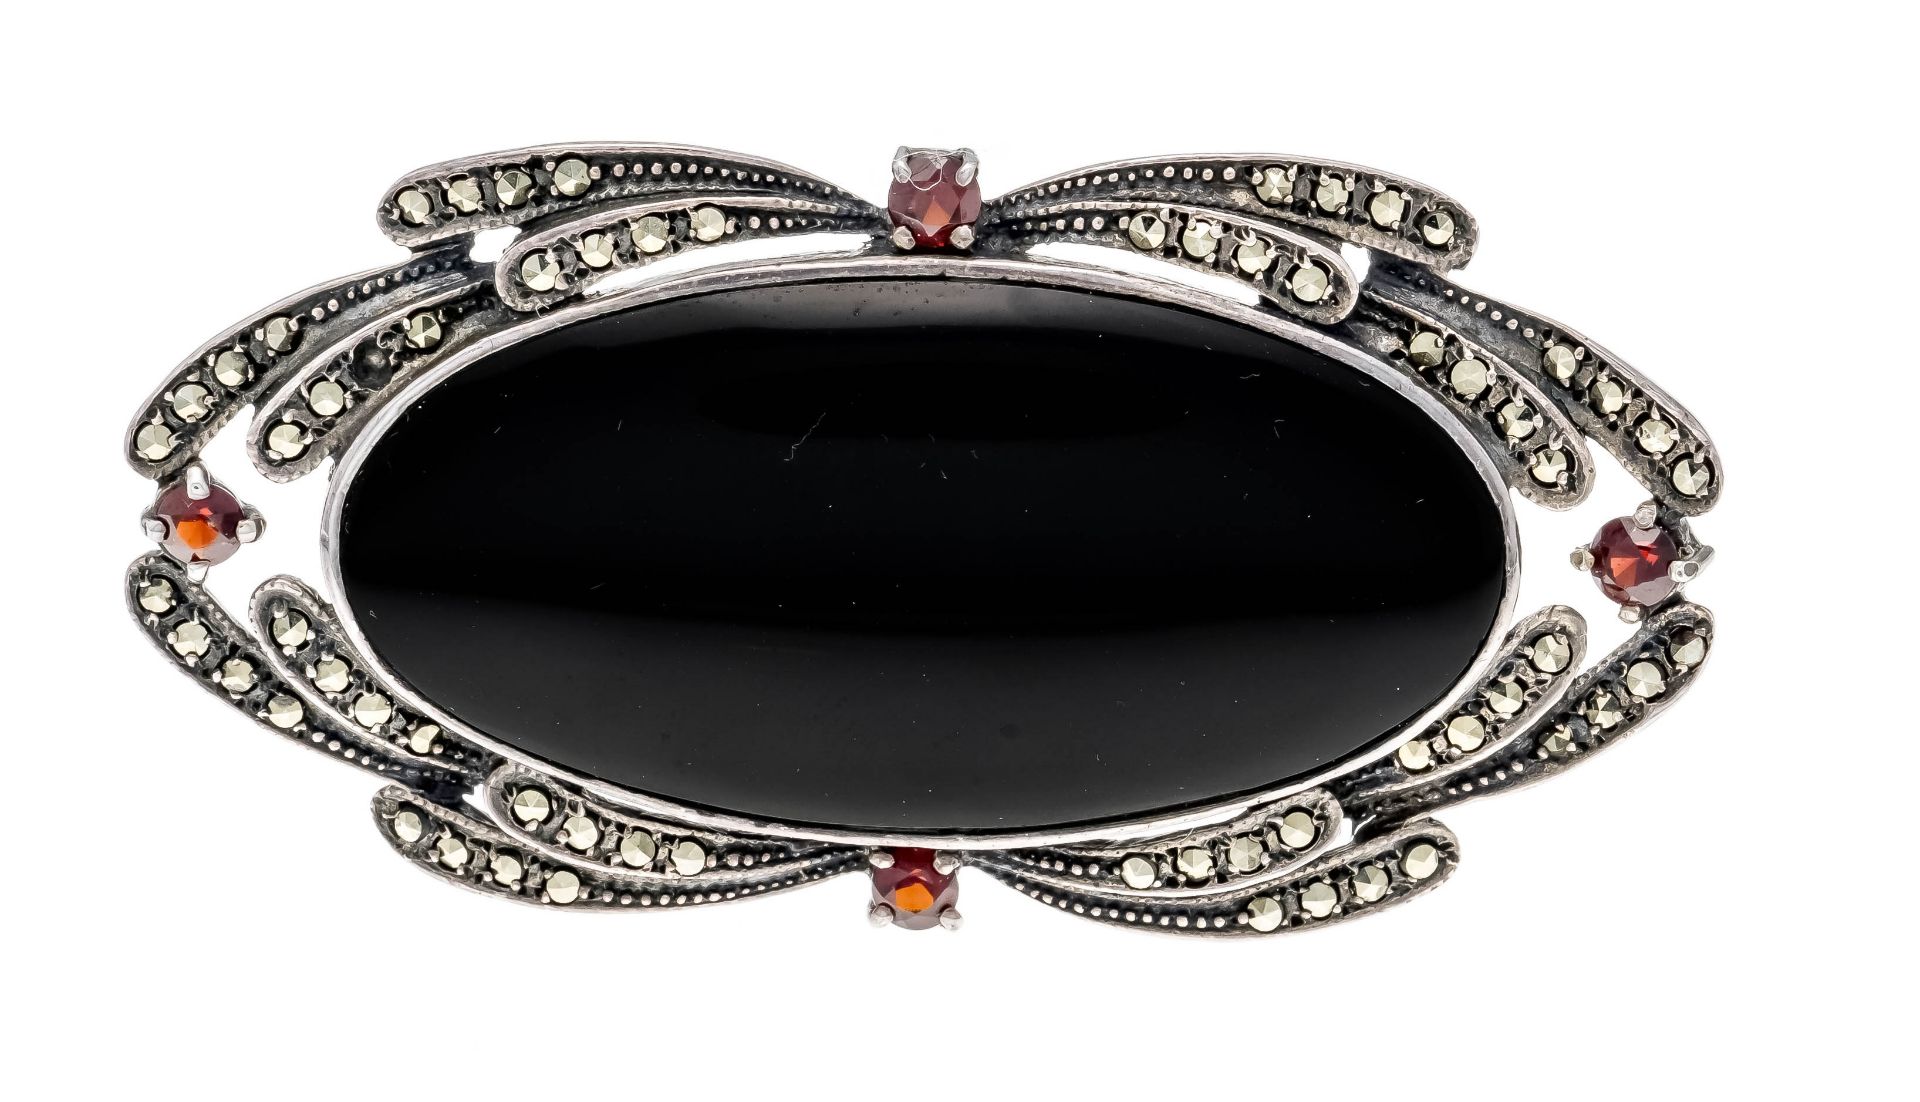 Onyx marcasite brooch silver 925/000 with an oval onyx plate 46 x 22 mm, marcasites, one stone